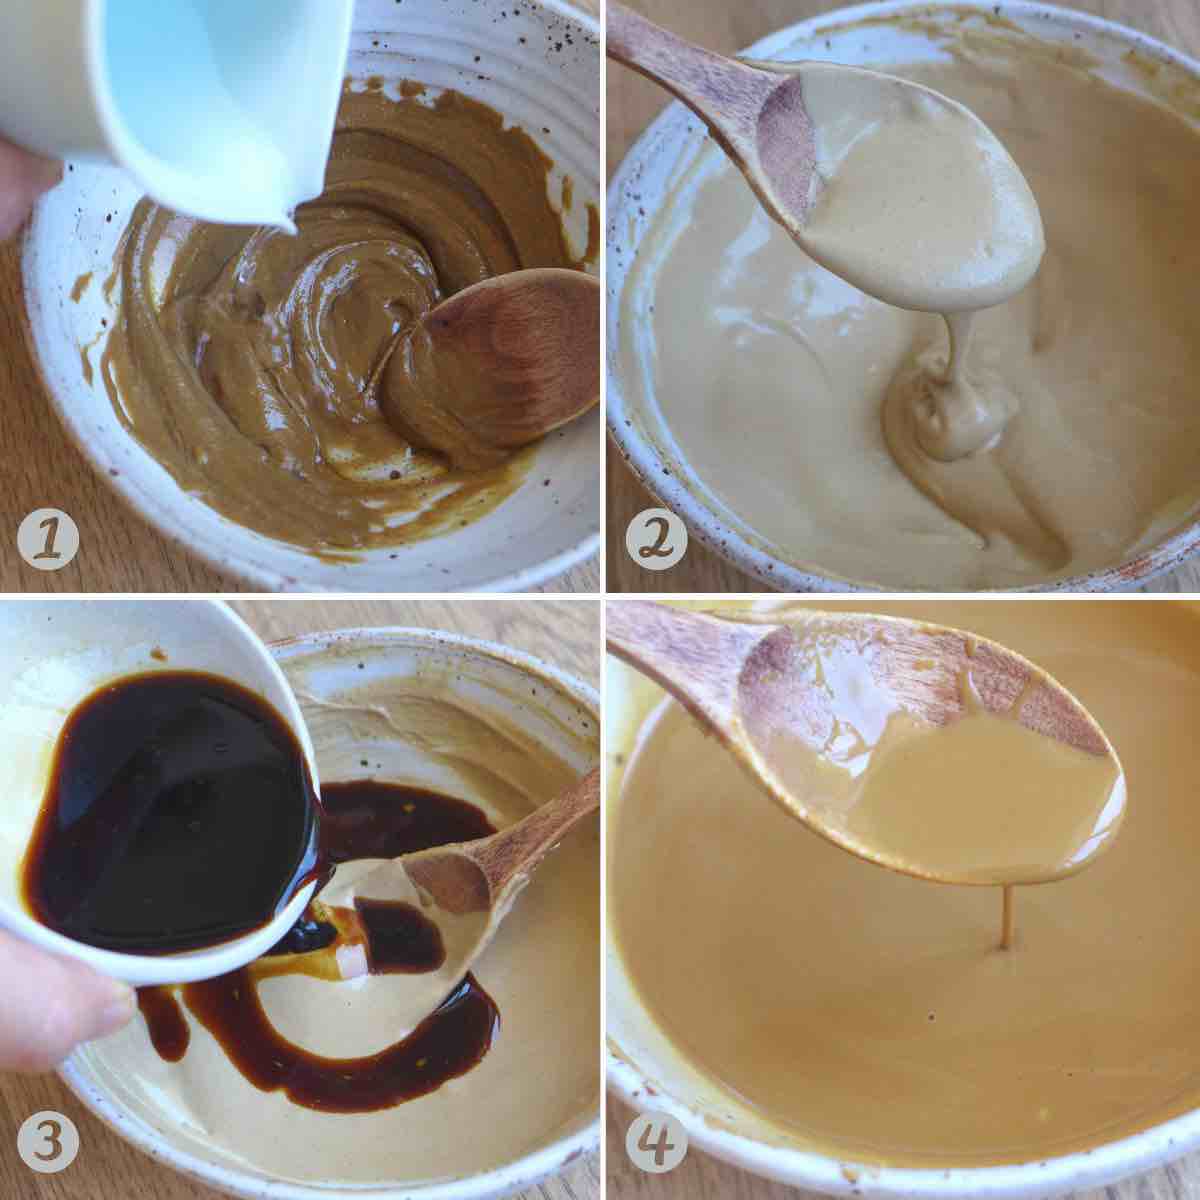 diluting sesame paste with water, soy sauce and vinegar.